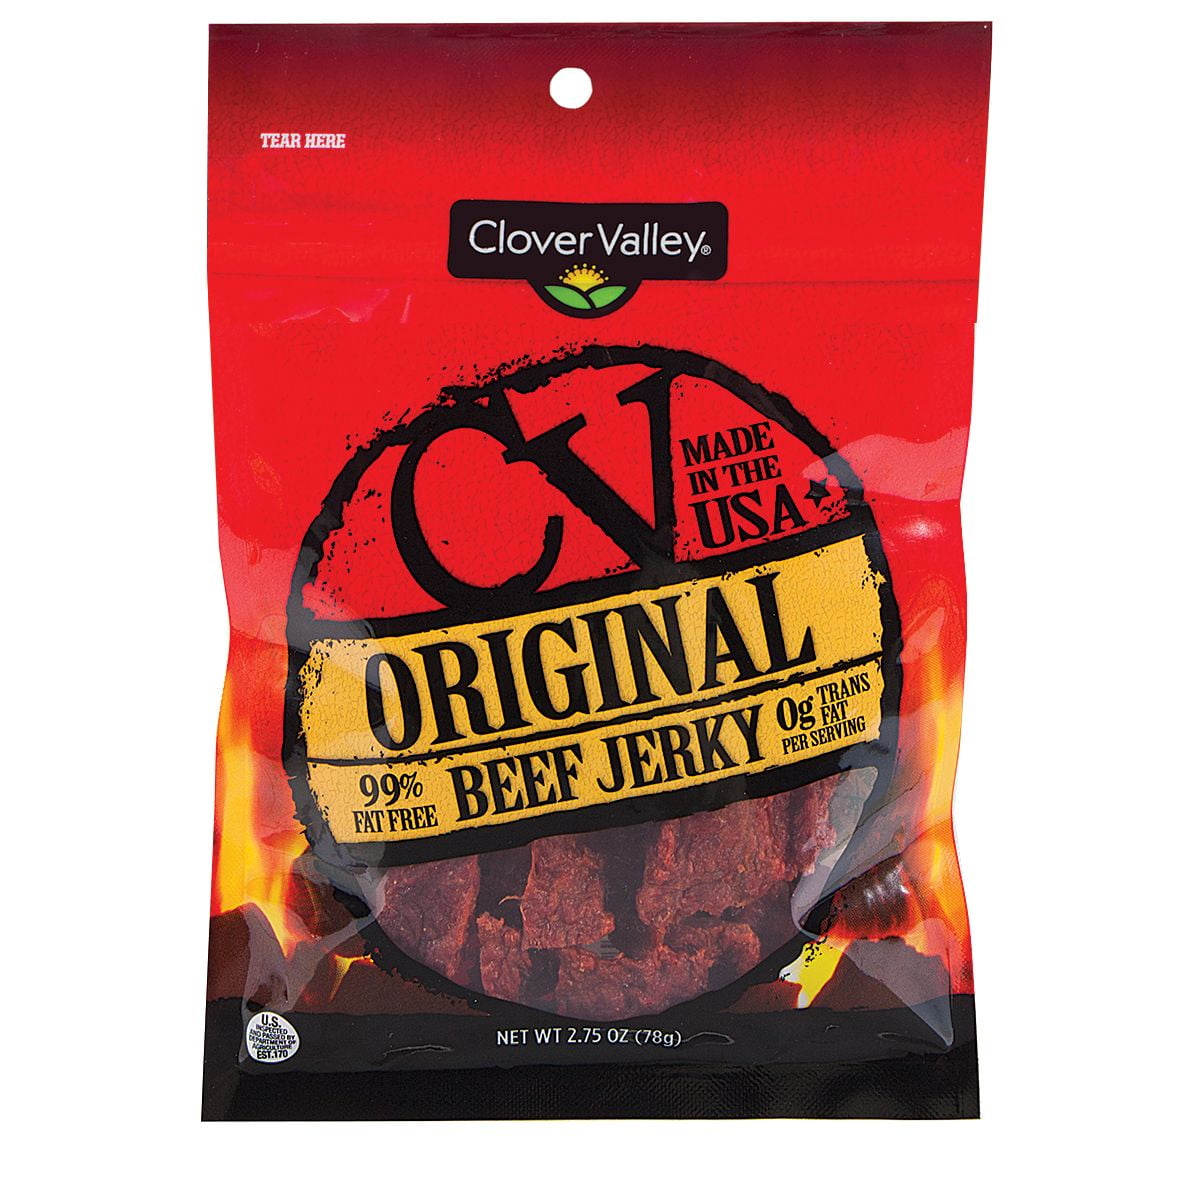 A Product of Clover Valley Beef Jerky 2.75 oz. Pack of